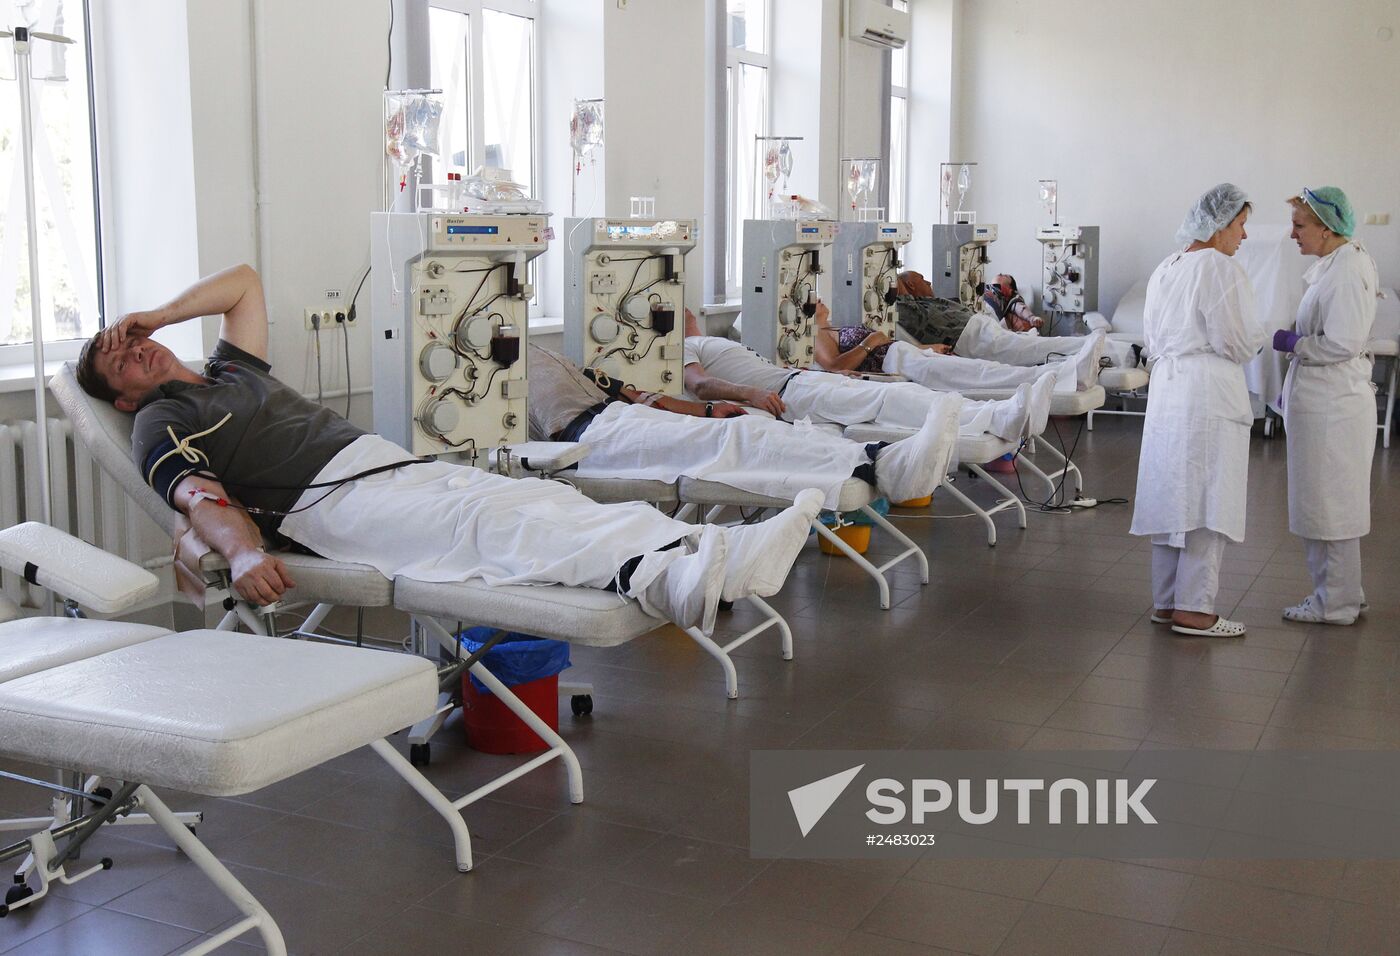 Donating blood for Donetsk attack victims